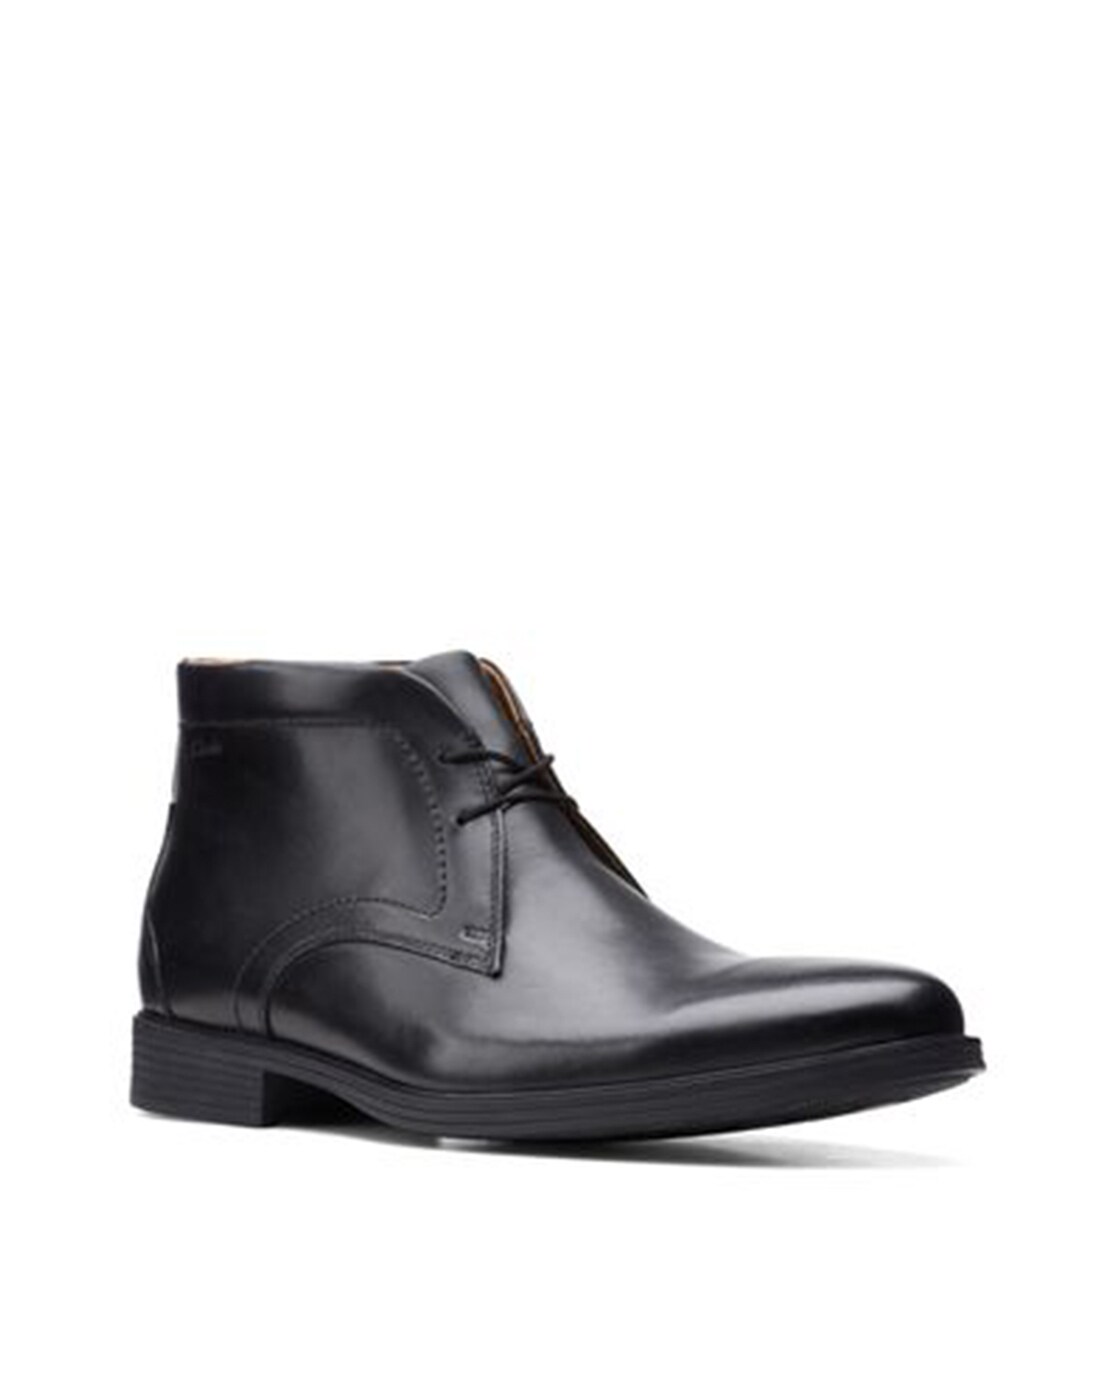 Buy BLACK Boots for by CLARKS Online Ajio.com